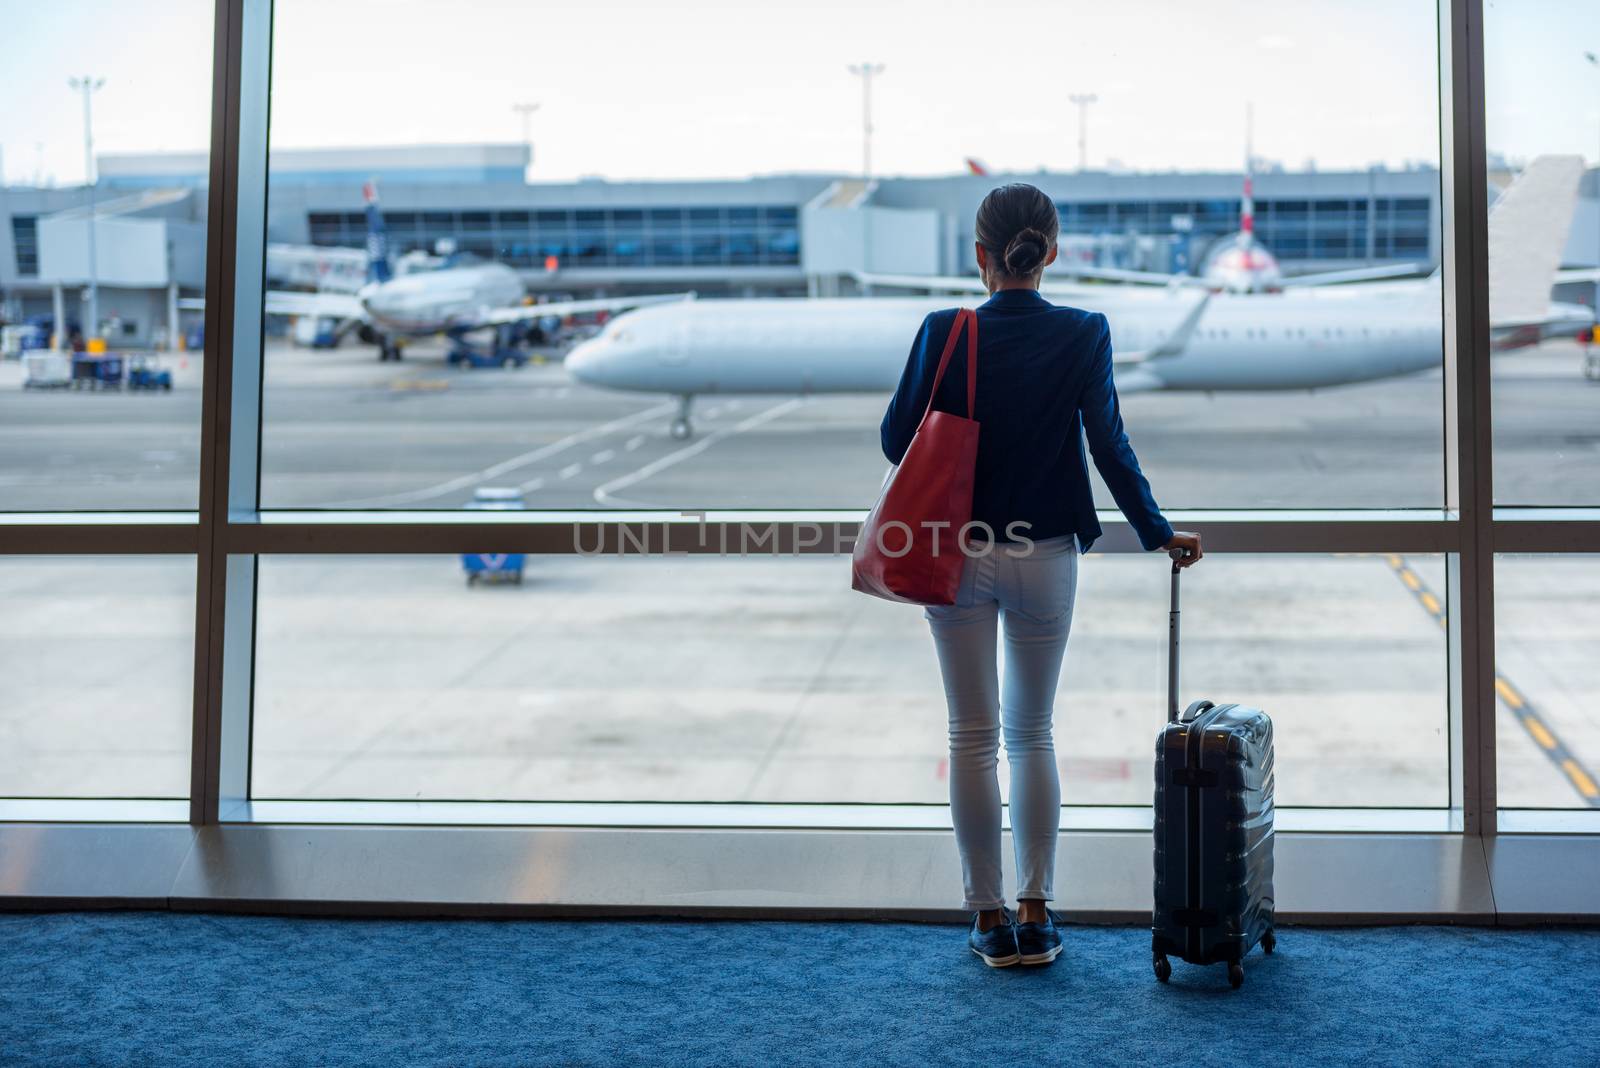 Businesswoman traveling in airport. Woman looking through the window at tarmac and planes waiting for flight. Business travel concept by Maridav